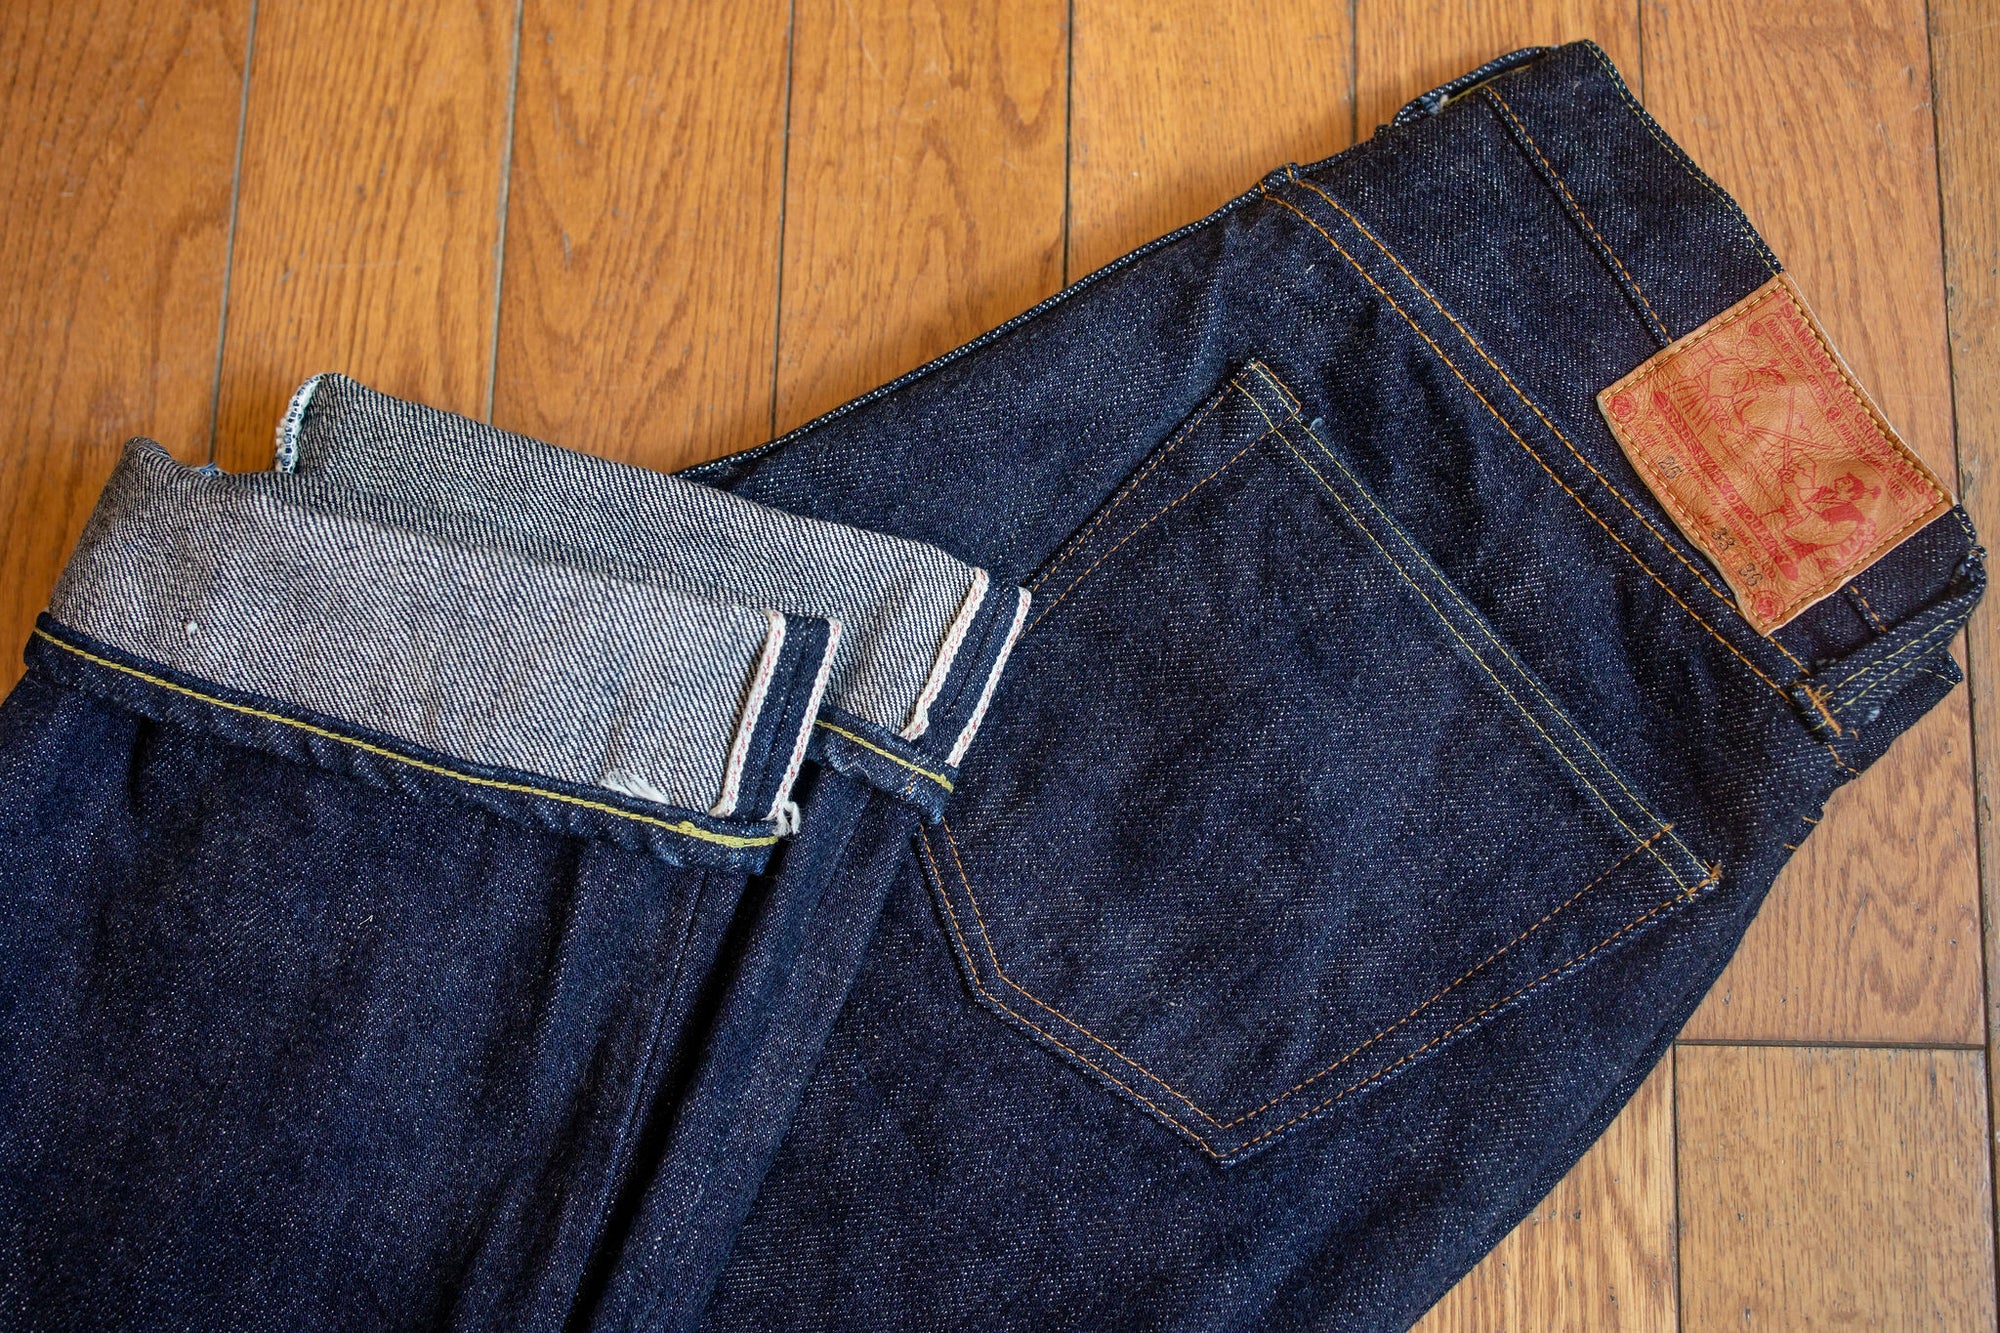 The Raw Denim Care Guide - Pro Tips | Asuwere